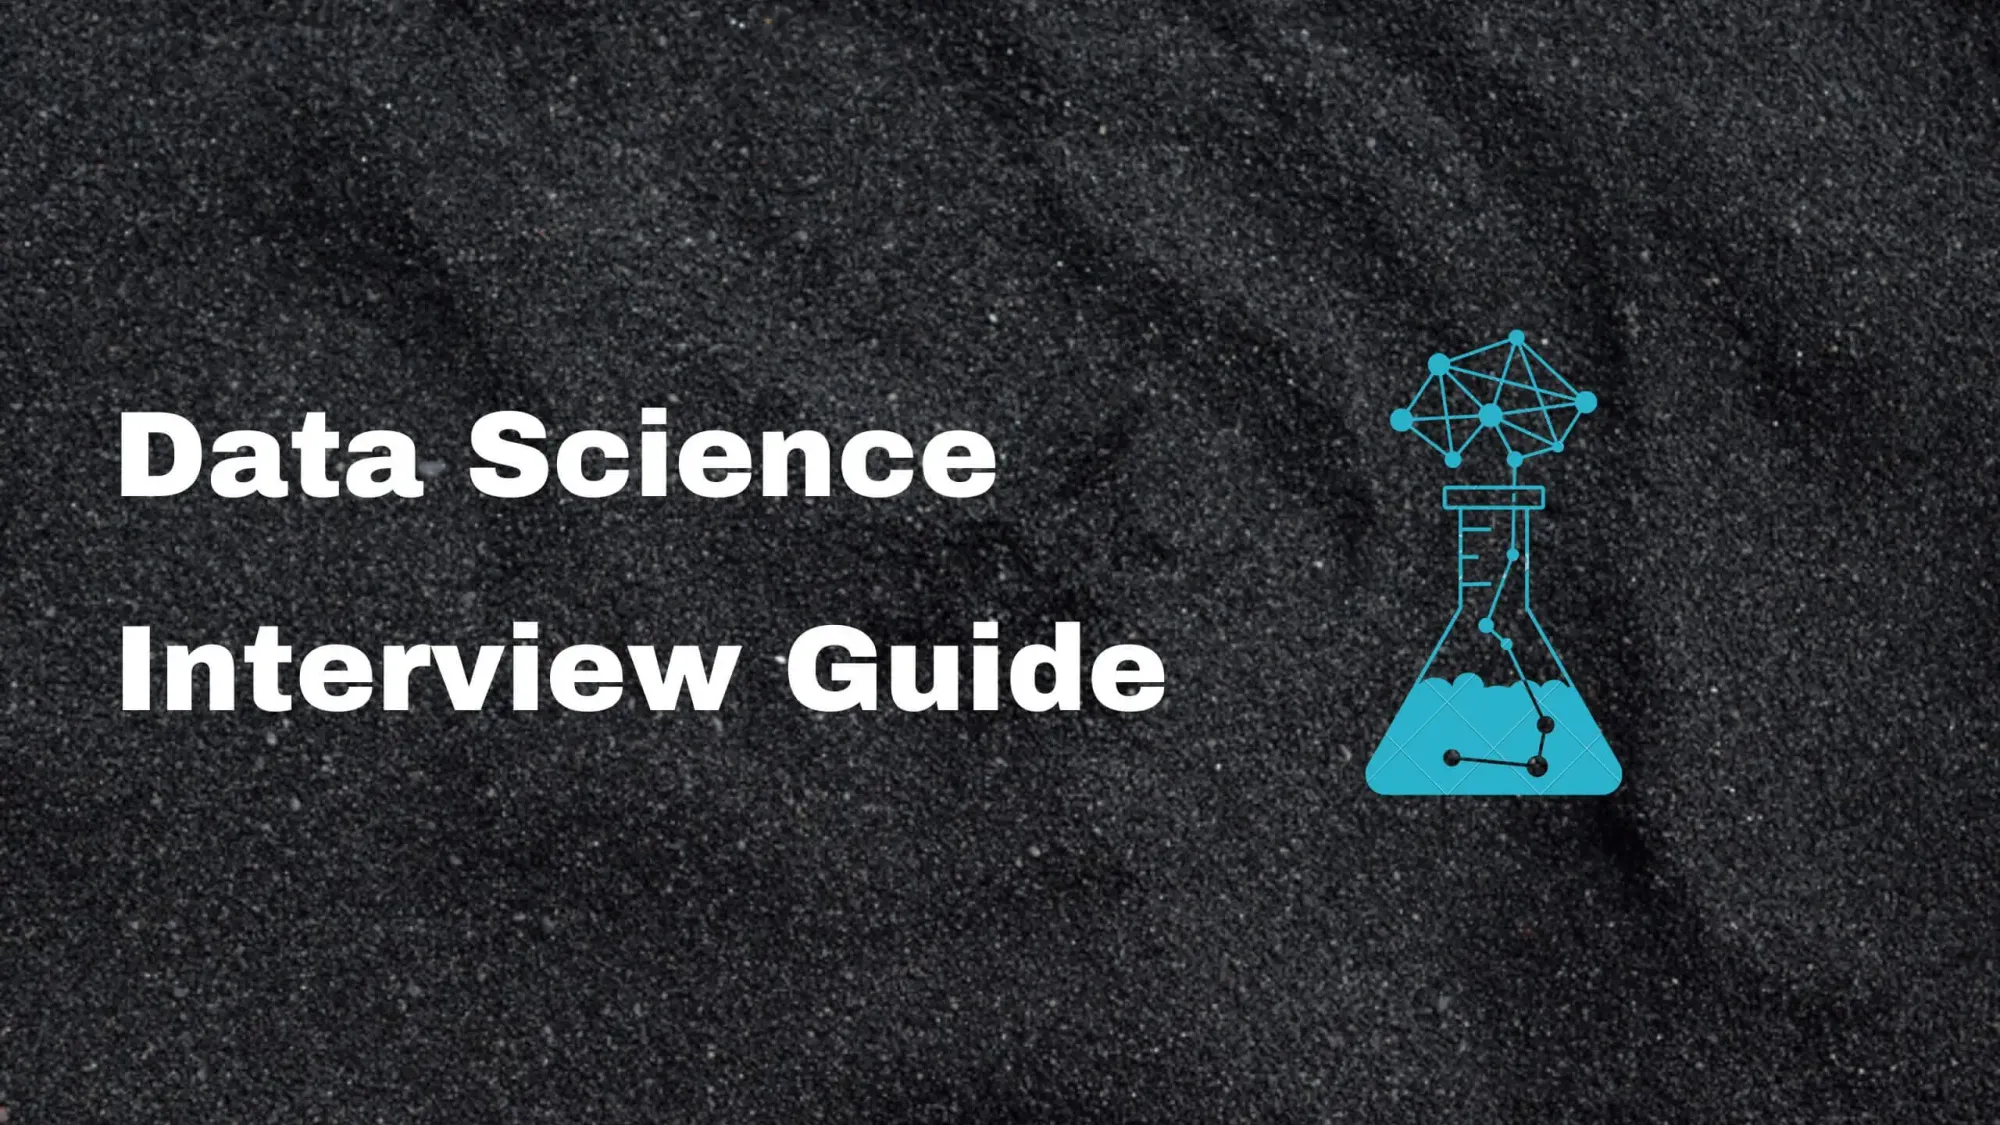 Data Science Interview Guide - WowData.Science